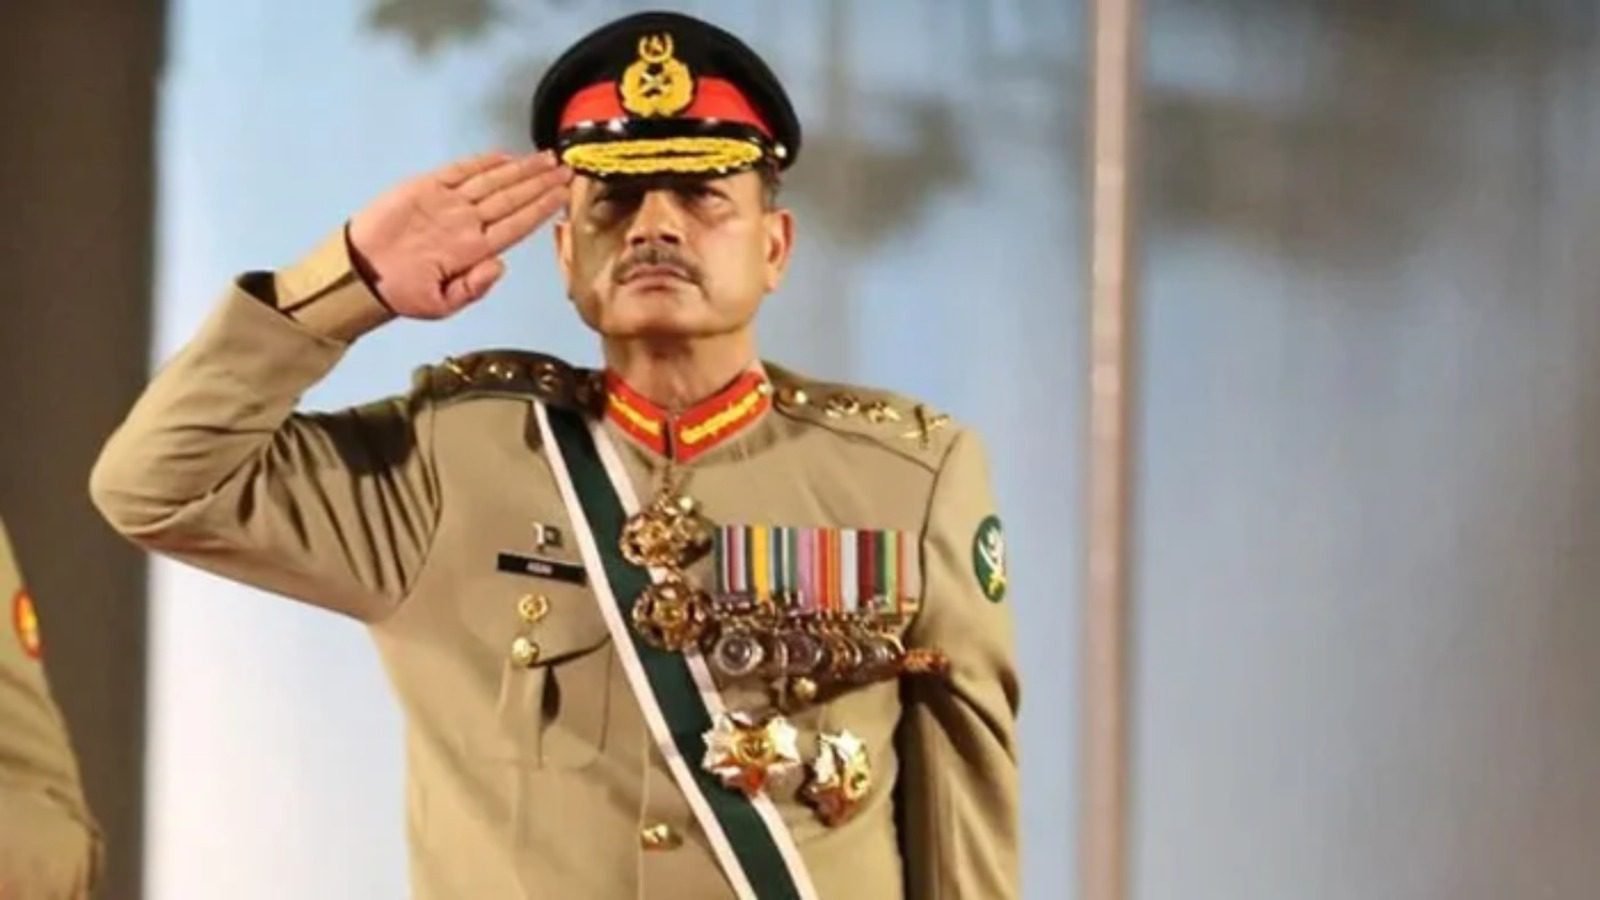 Lahore Garisson visit: COAS vows justice for May 9 tragedy, addresses digital terrorism